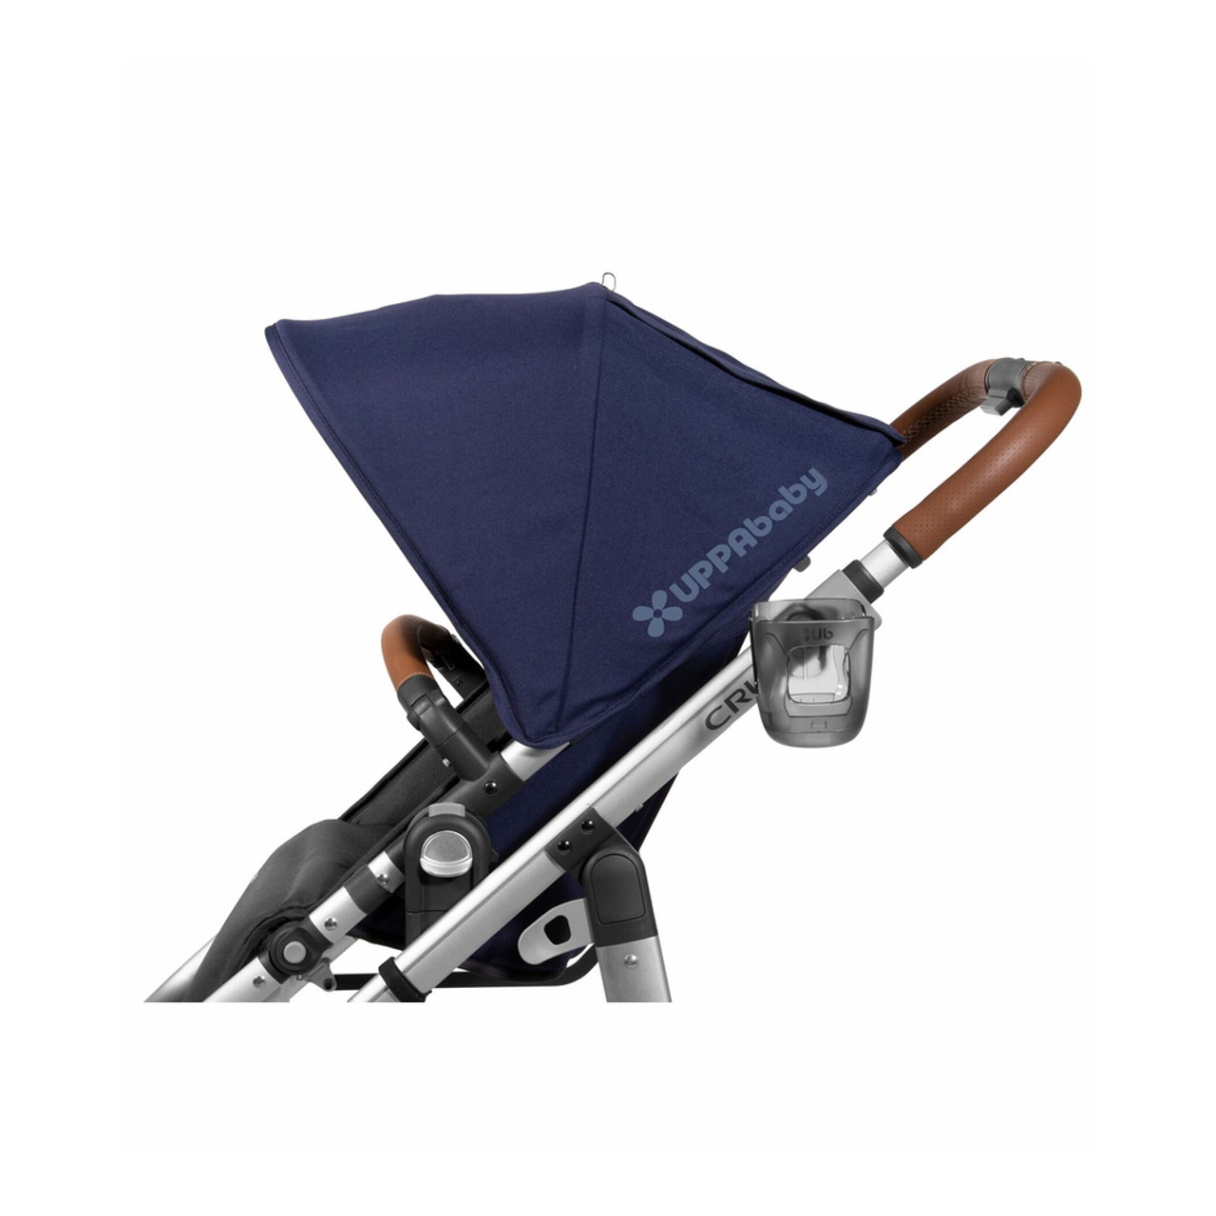 Upgrade Your UPPAbaby Cruz With Stylish Accessories For A Chic Ride!